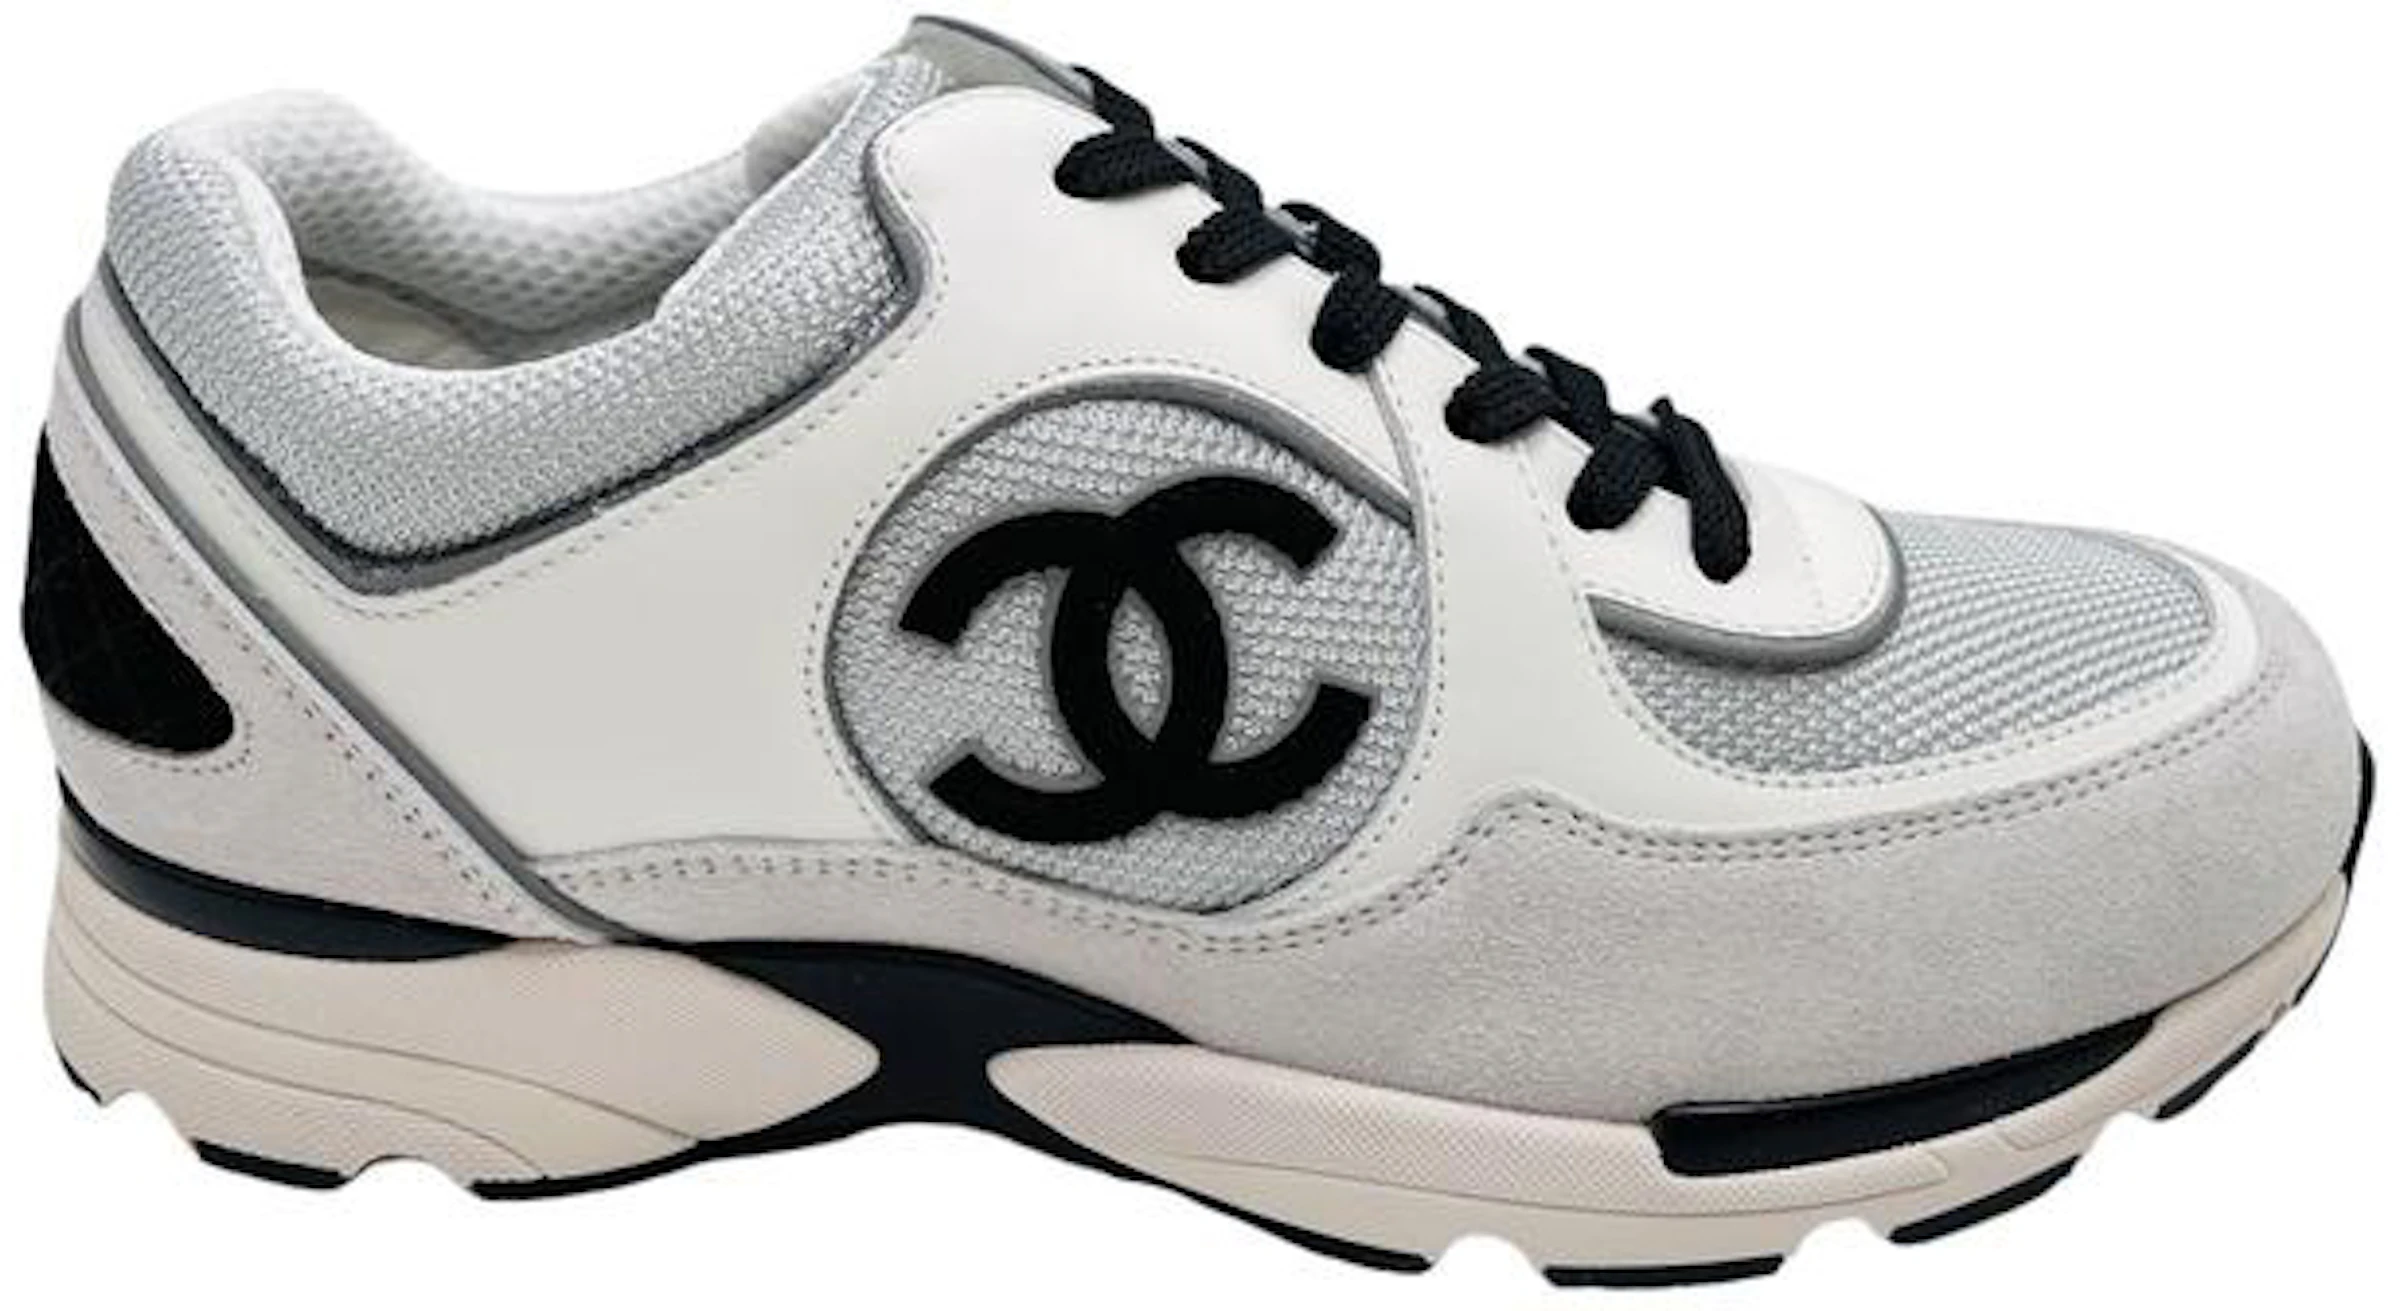 Chanel's Line Up Of Resort Sneakers Make A Sleek And Sexy Statement  SNOBETTE